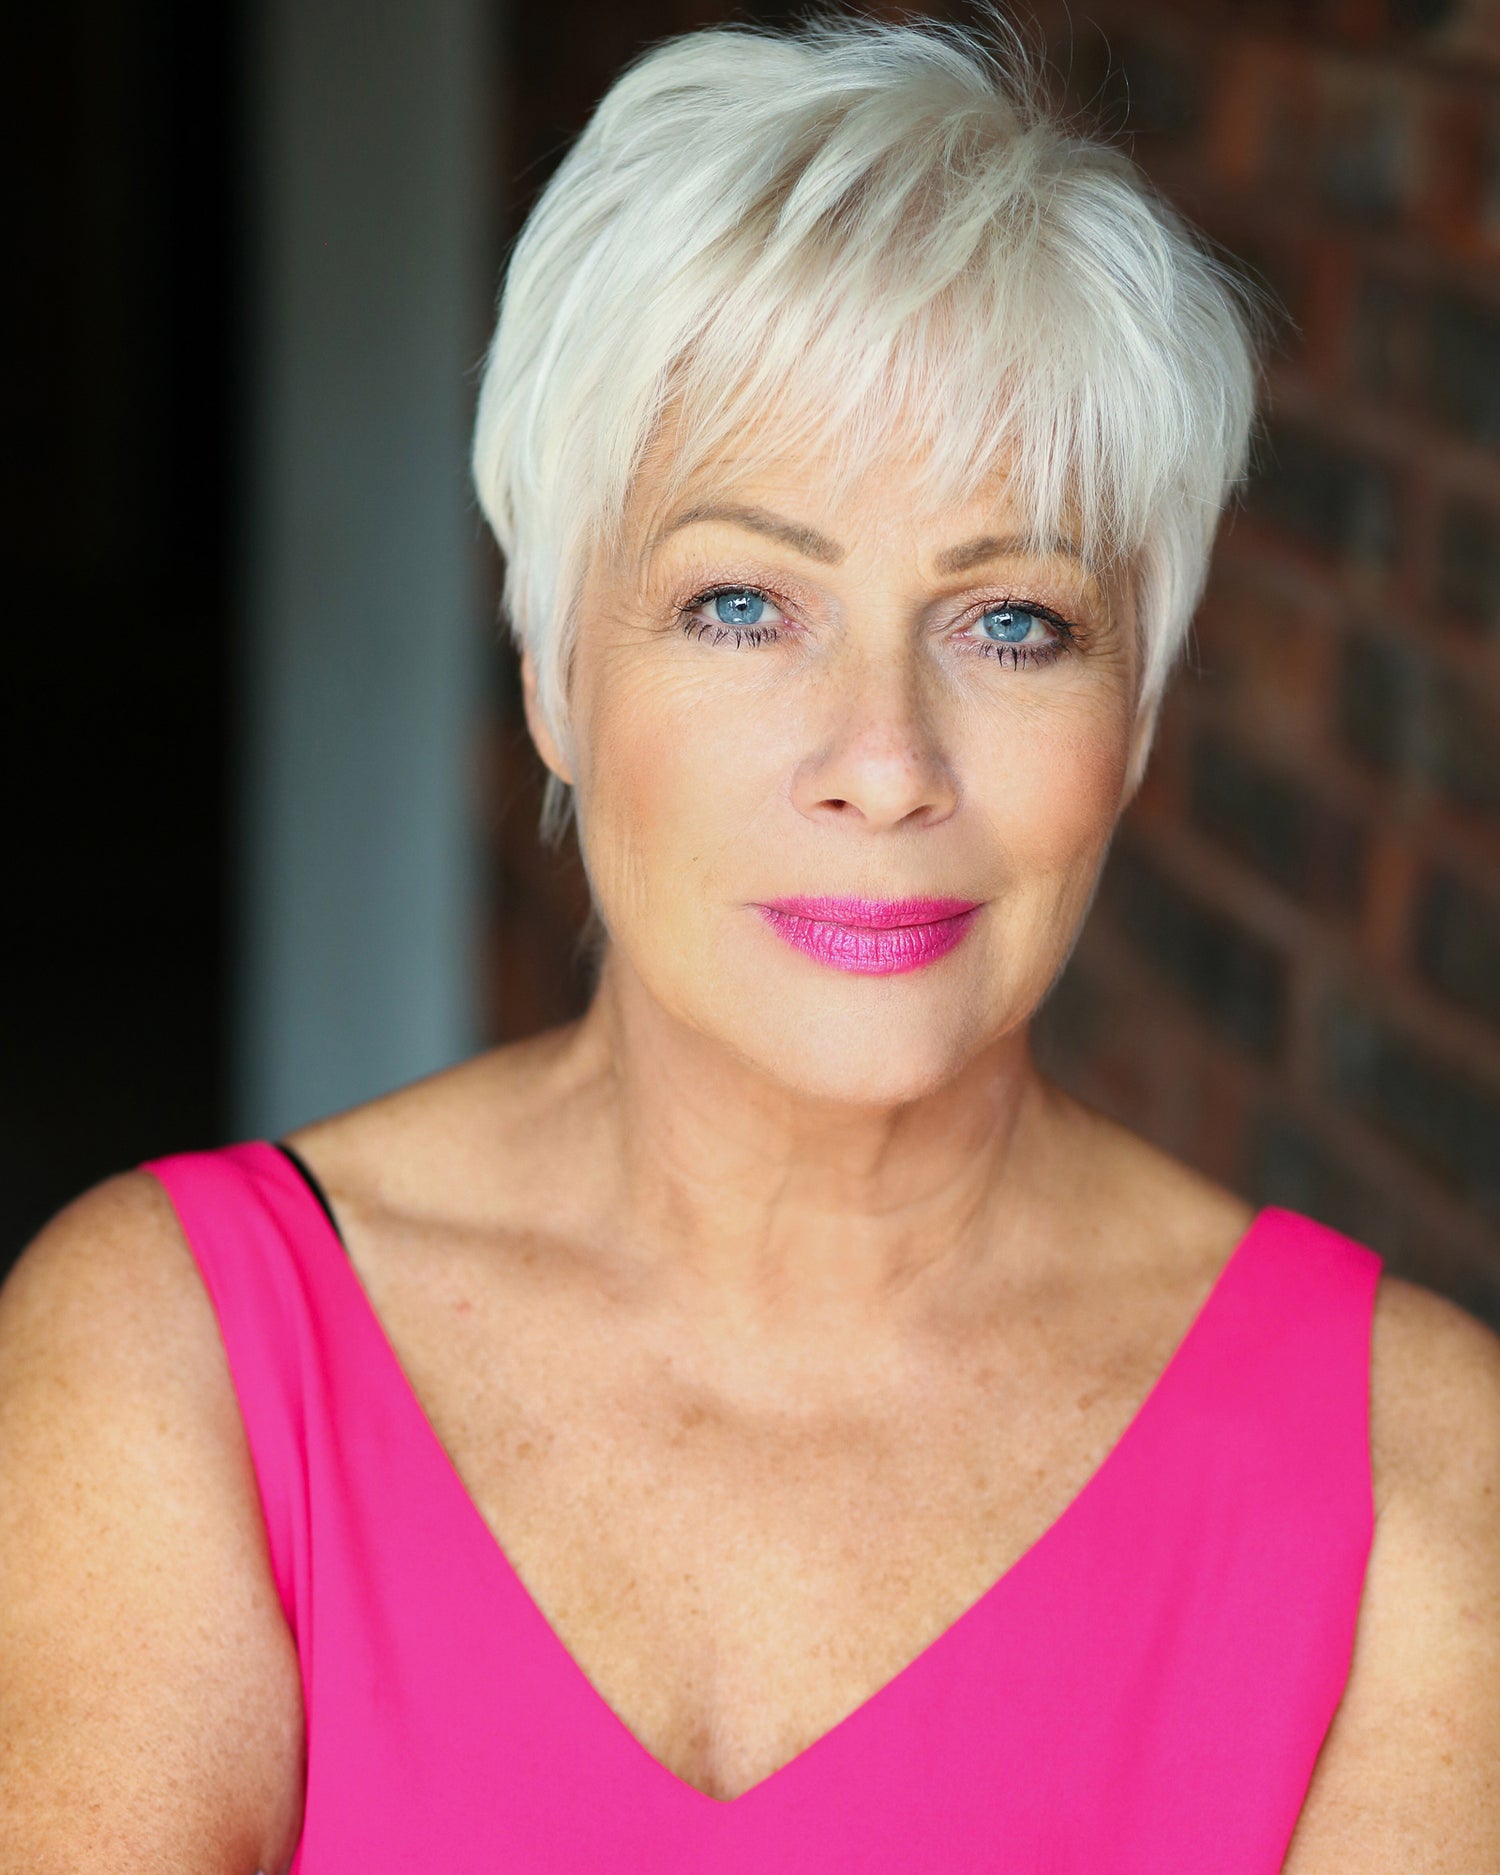 10 minutes with Denise Welch